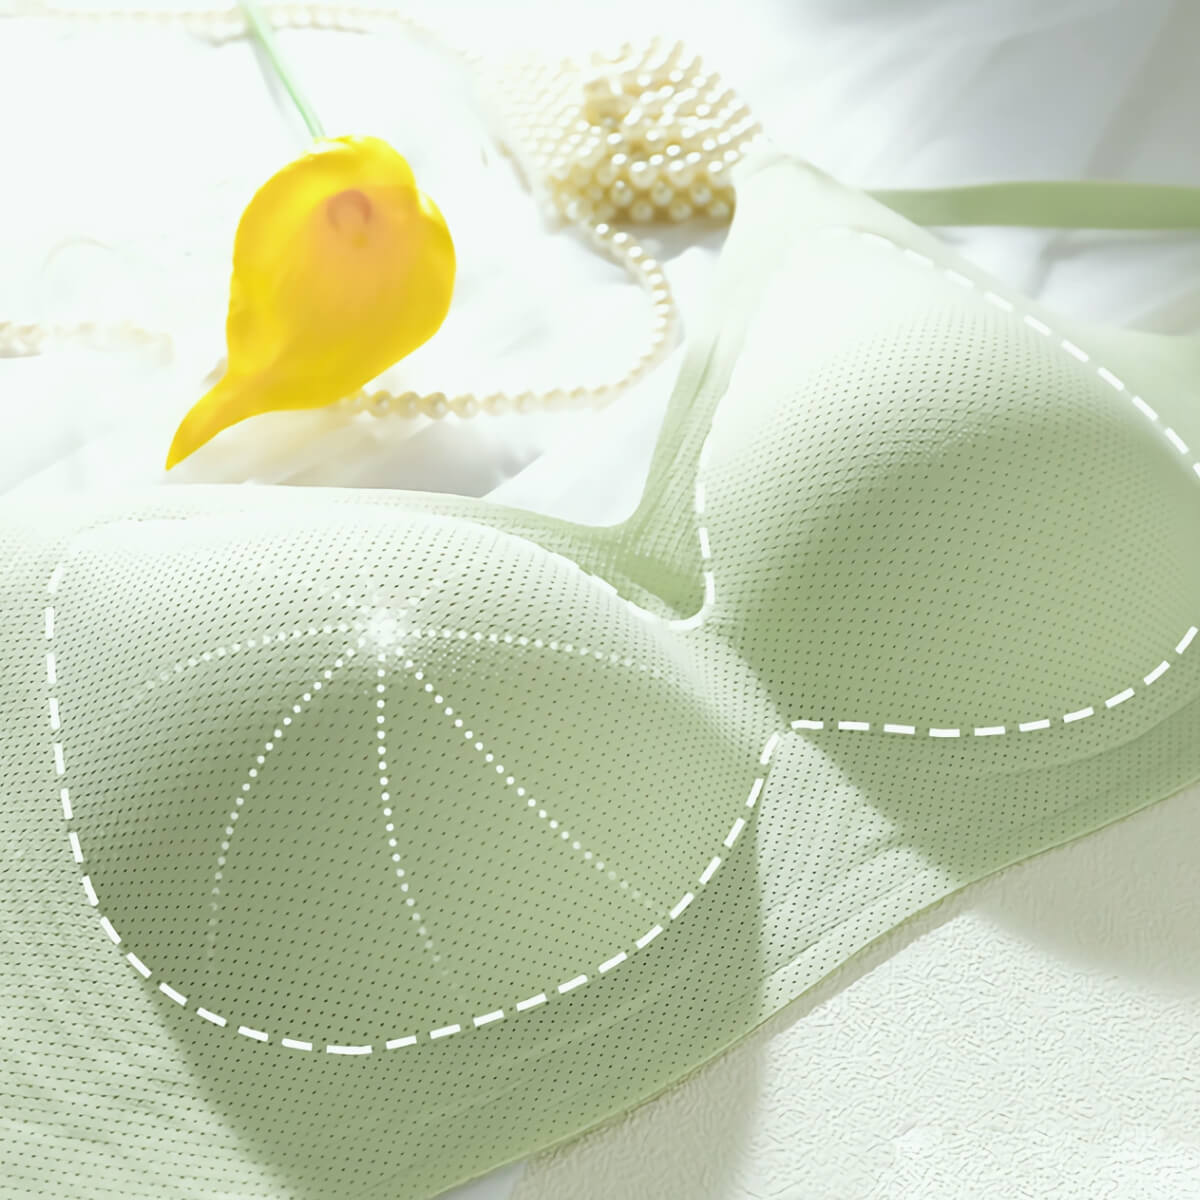 2Pack Push Up 3D Molded Cup Bra – Okay Trendy